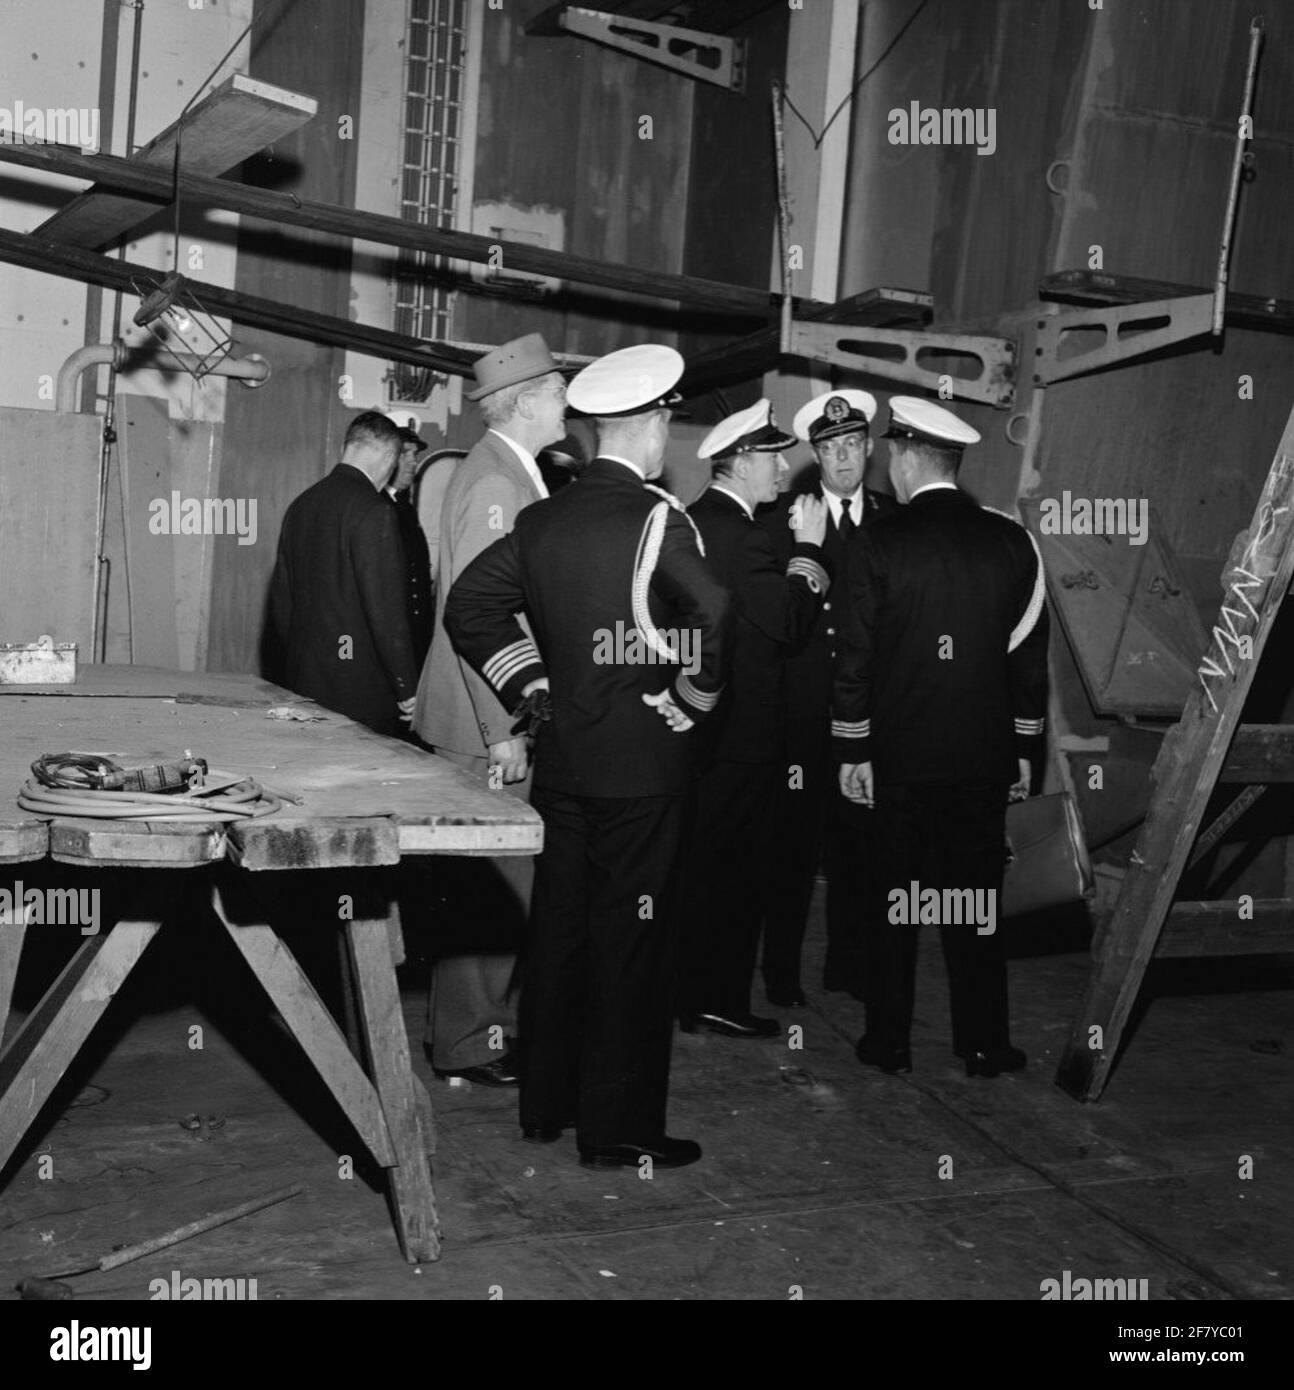 Prince Bernhard, in his position as Inspector General of the Armed Forces (IGK) and in the Uniform of Lieutenant Admiral (LTADM), visit the Rotterdamsche Droogdok Maatschappij (RDM) at the Heijplaat in Rotterdam. The seven provinces (Zipprov) (C 802) and the pool star (A 835), the supply ship for the Royal Netherlands Marine (KM), which after the commissioning as Harer Majesteits (Hr.Ms.) will go into the pool star. The hangar is also visited on board the pool star. Stock Photo